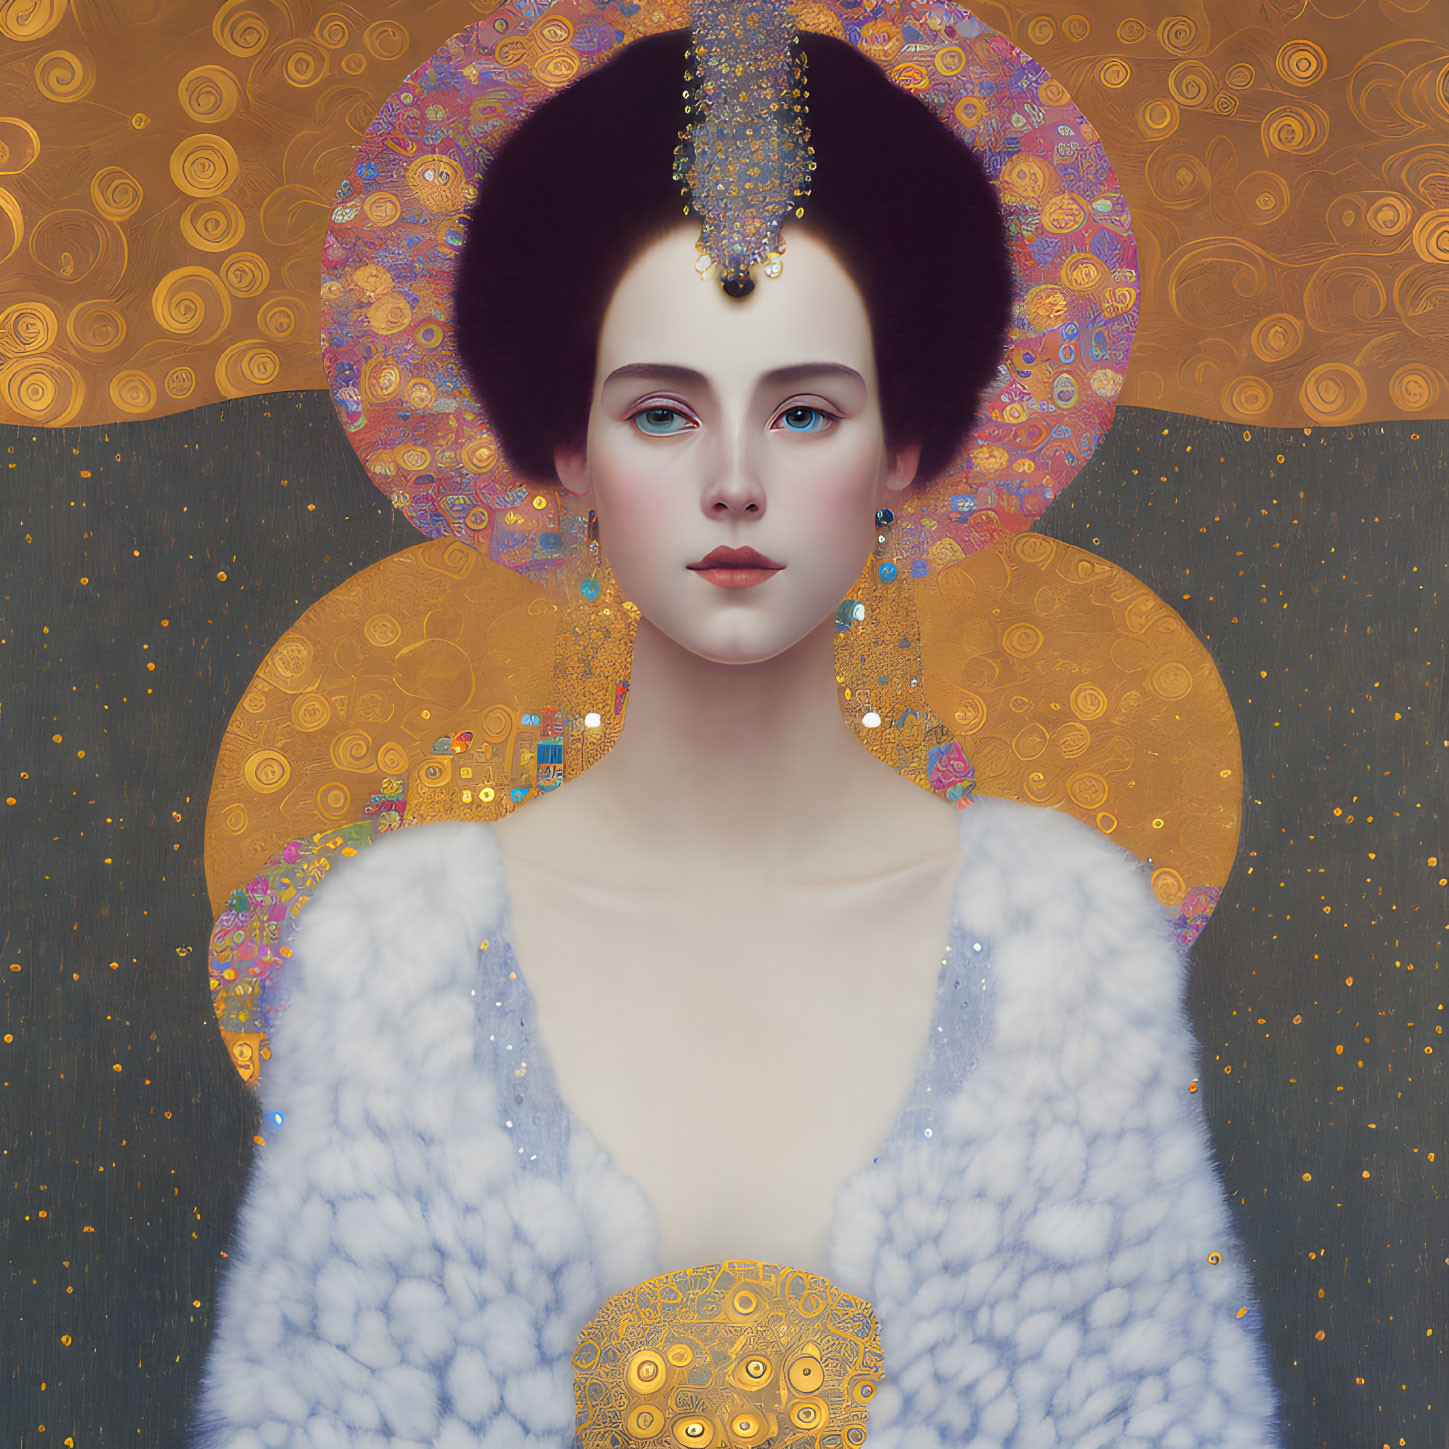 Woman portrait with ornate halo, headdress, and jewelry on golden background